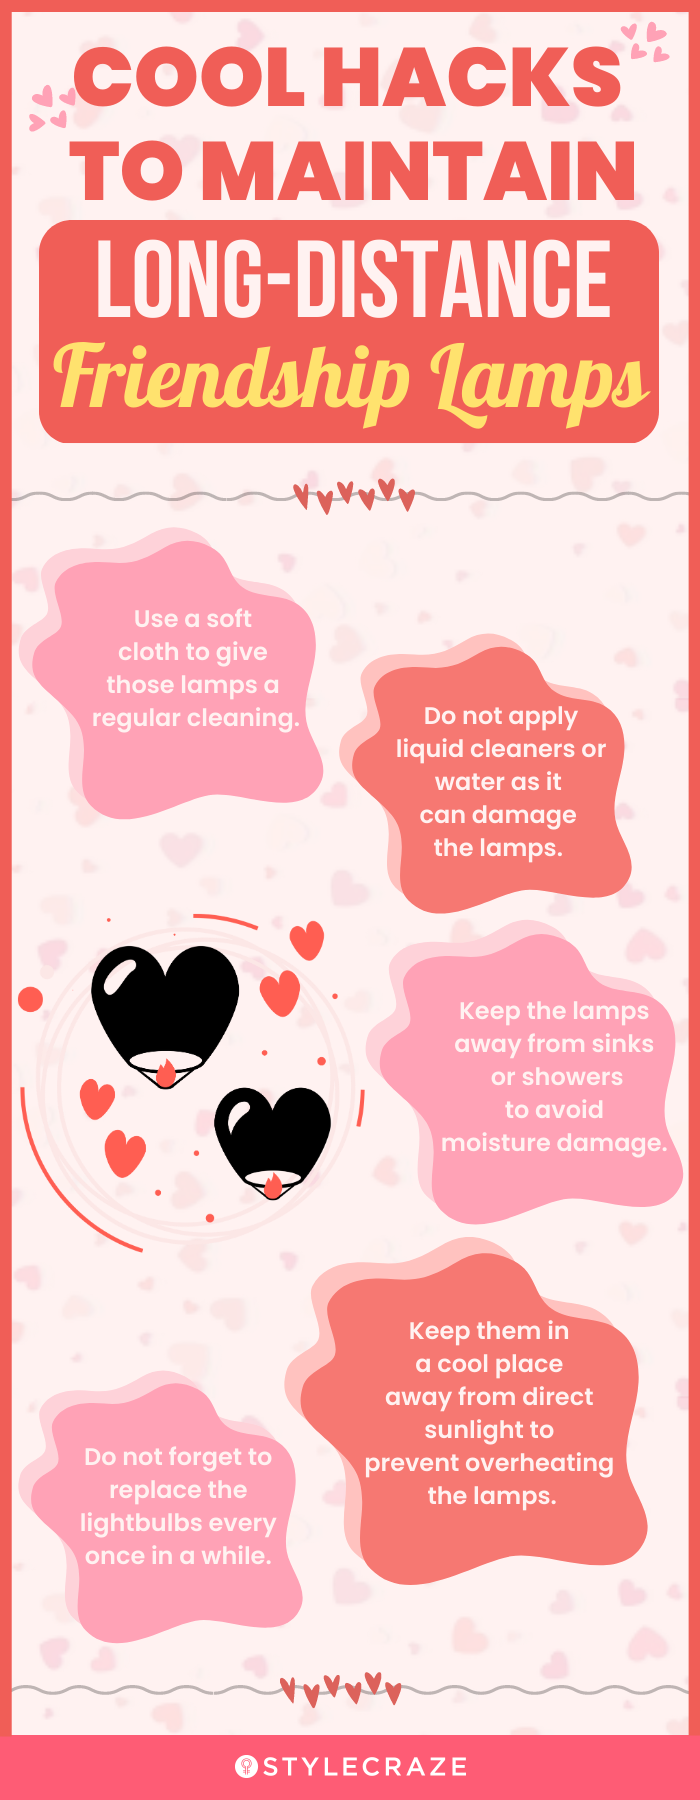 Cool Hacks To Maintain Long-Distance Friendship Lamps (infographic)